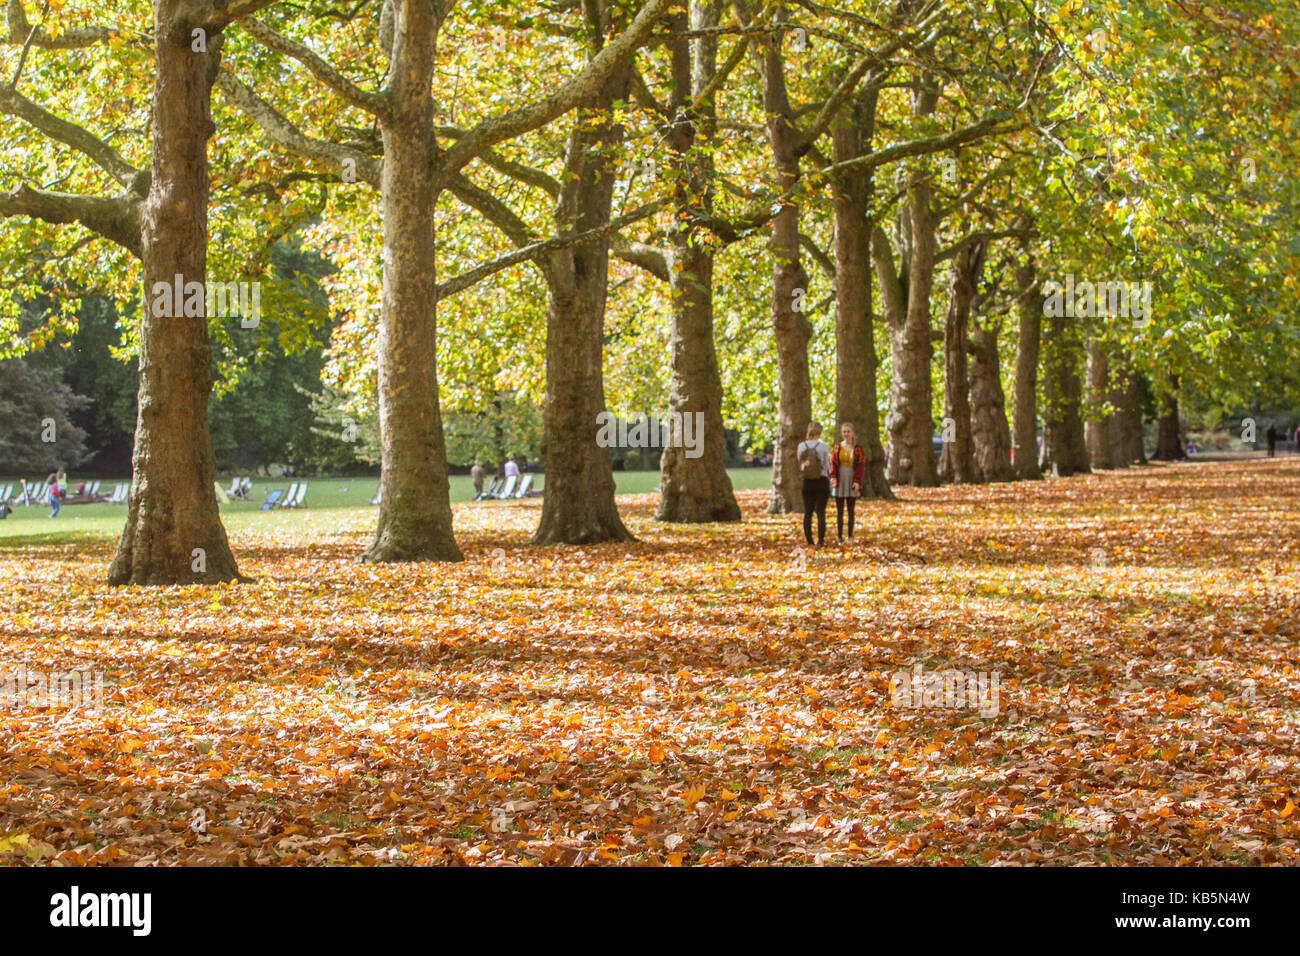 London, UK. 28th Sep, 2017. UK weather. People walk amongst a carpet of leaves in Saint James Park on a sunny day autumn day in London Credit: amer ghazzal/Alamy Live News Stock Photo